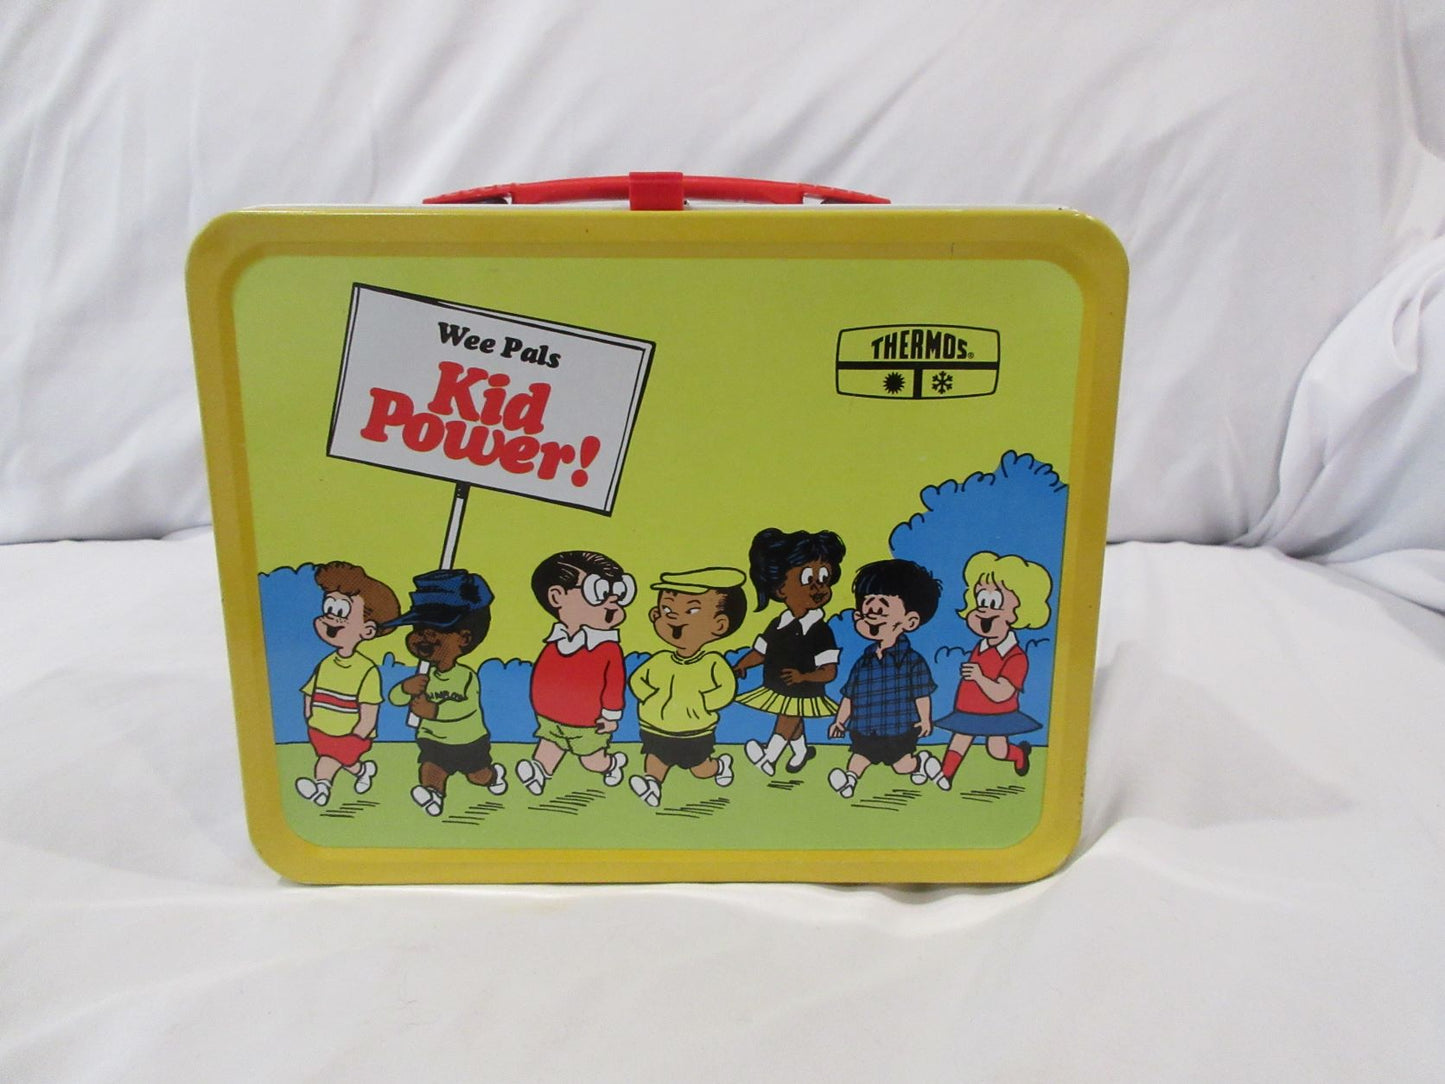 Wee Pals Kid Power Lunch box with Thermos